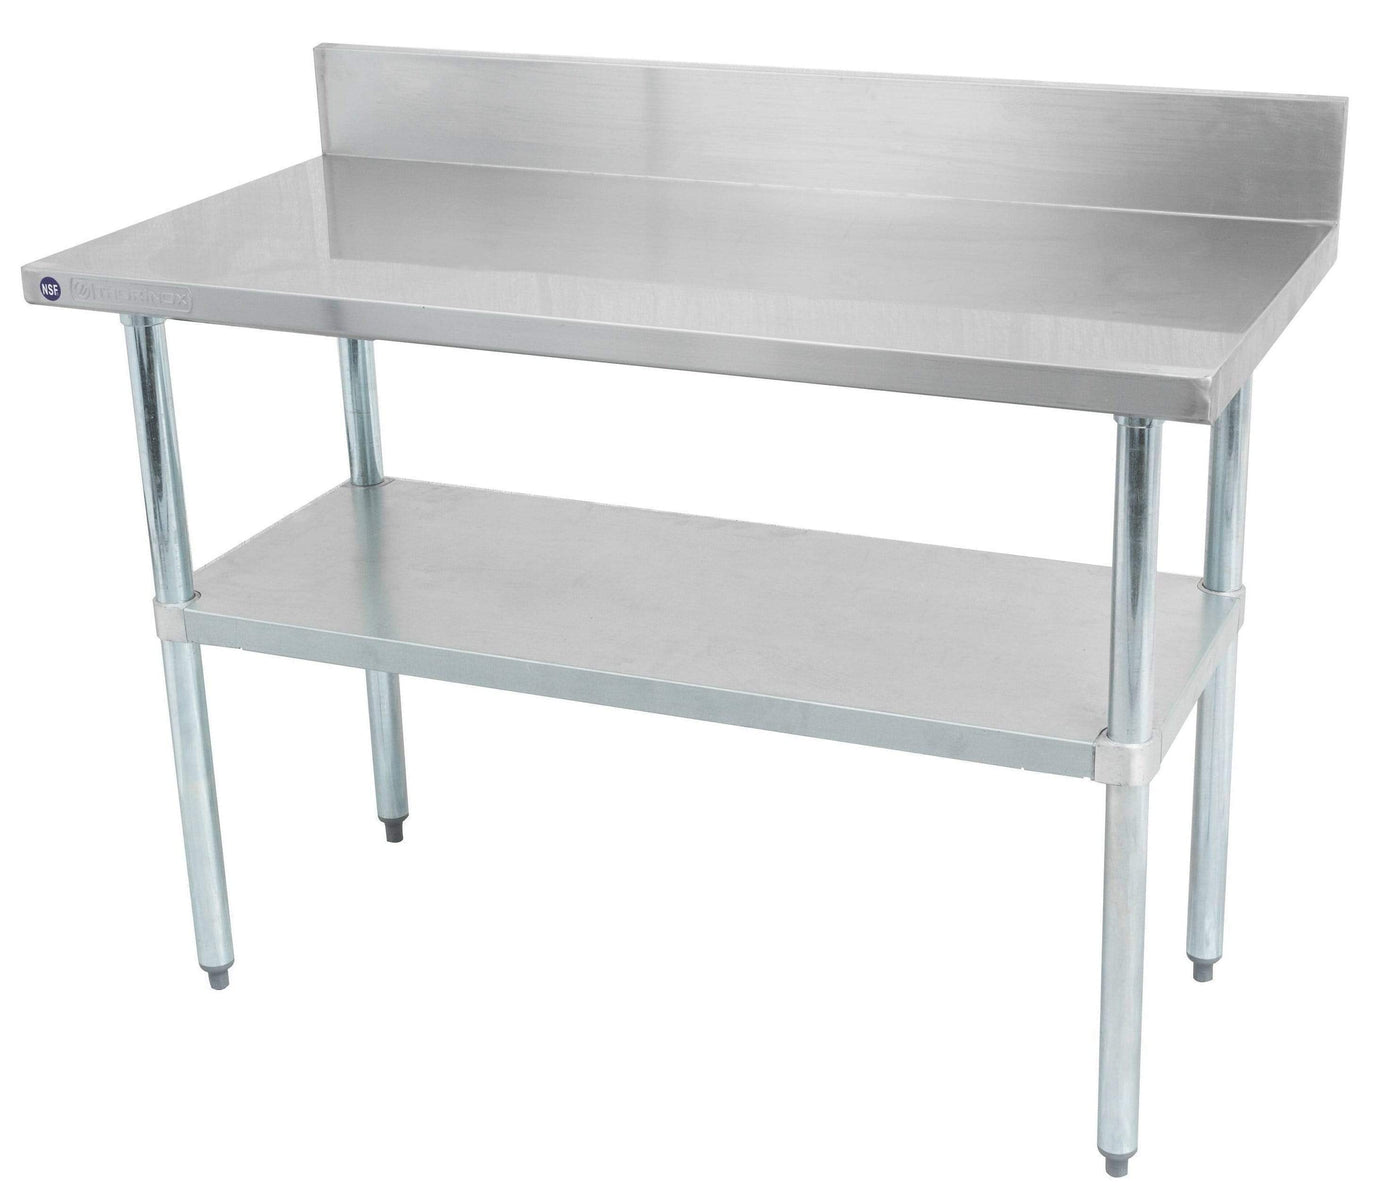 Thorinox DSST-2460-BKSS Table, 60"W x 24"D x 39"H, Stainless Steel Table with Backsplash and Stainless Steel Shelf